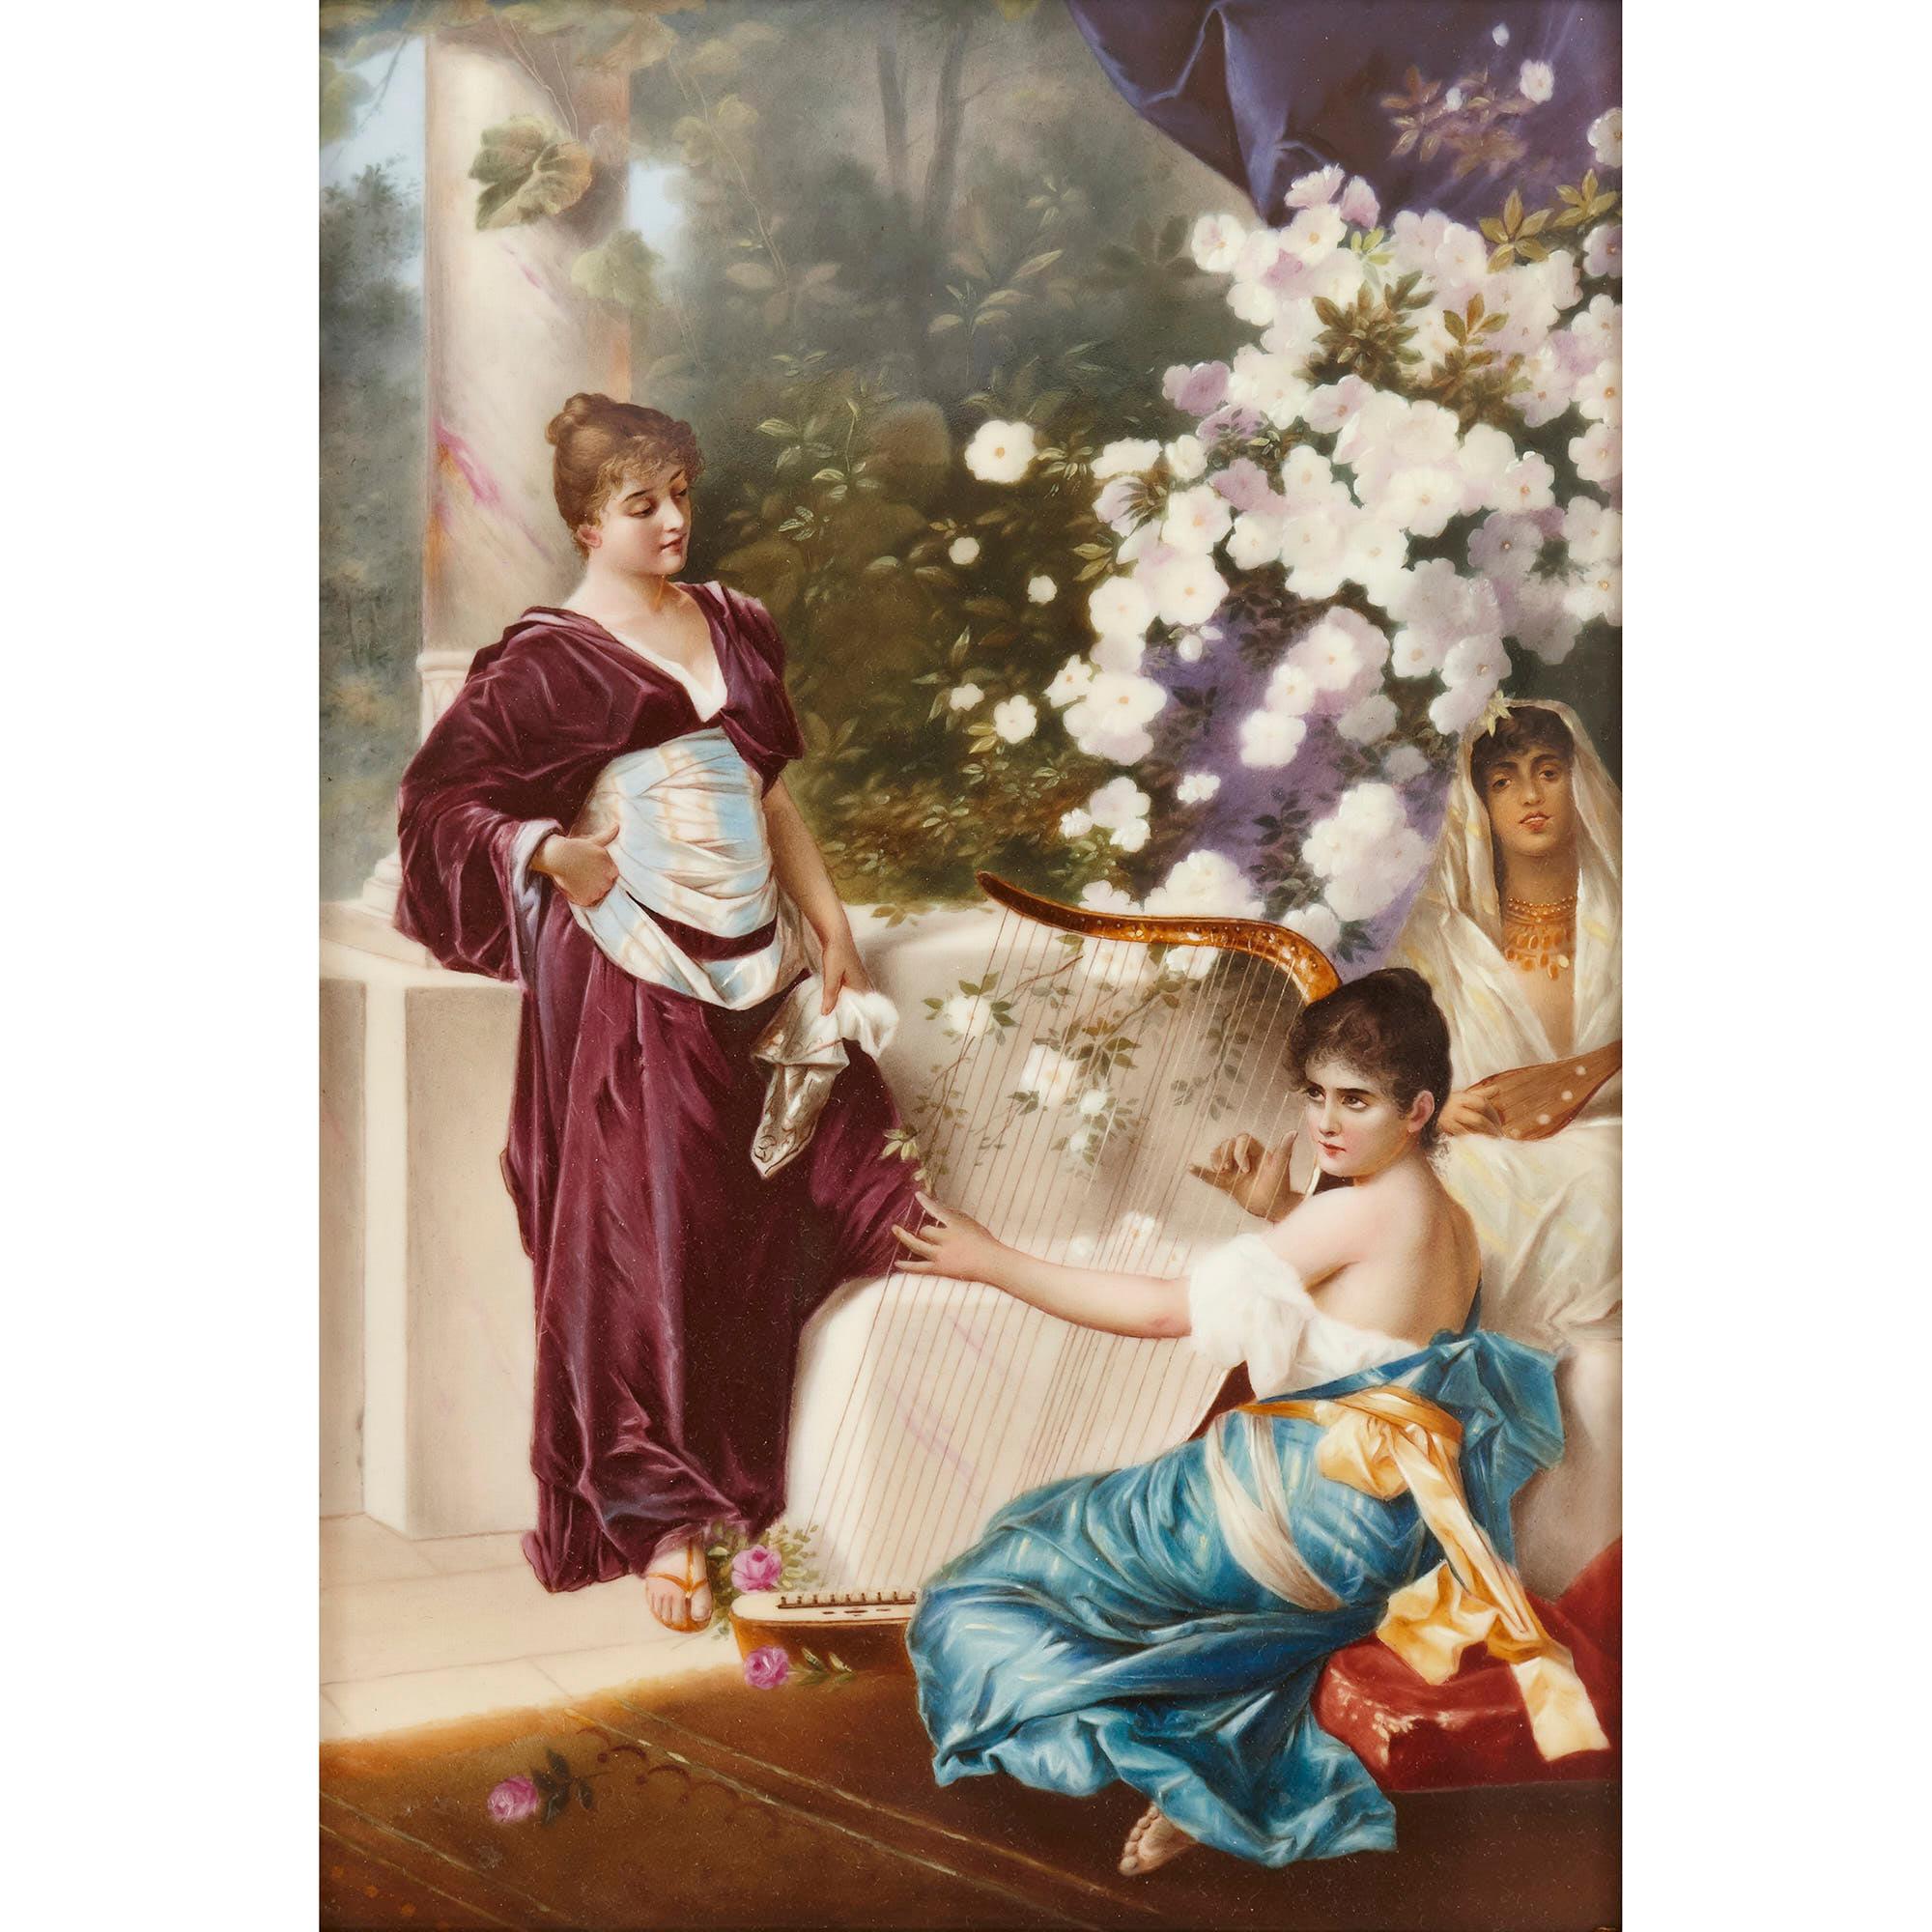 This painted porcelain plaque is a Fine work of art, and a beautiful example of the quality of the Konigliche Porzellan-Manufaktur’s (KPM factory’s) output in the 19th century. Established in 1763 by King Frederick II of Prussia (known as Frederick